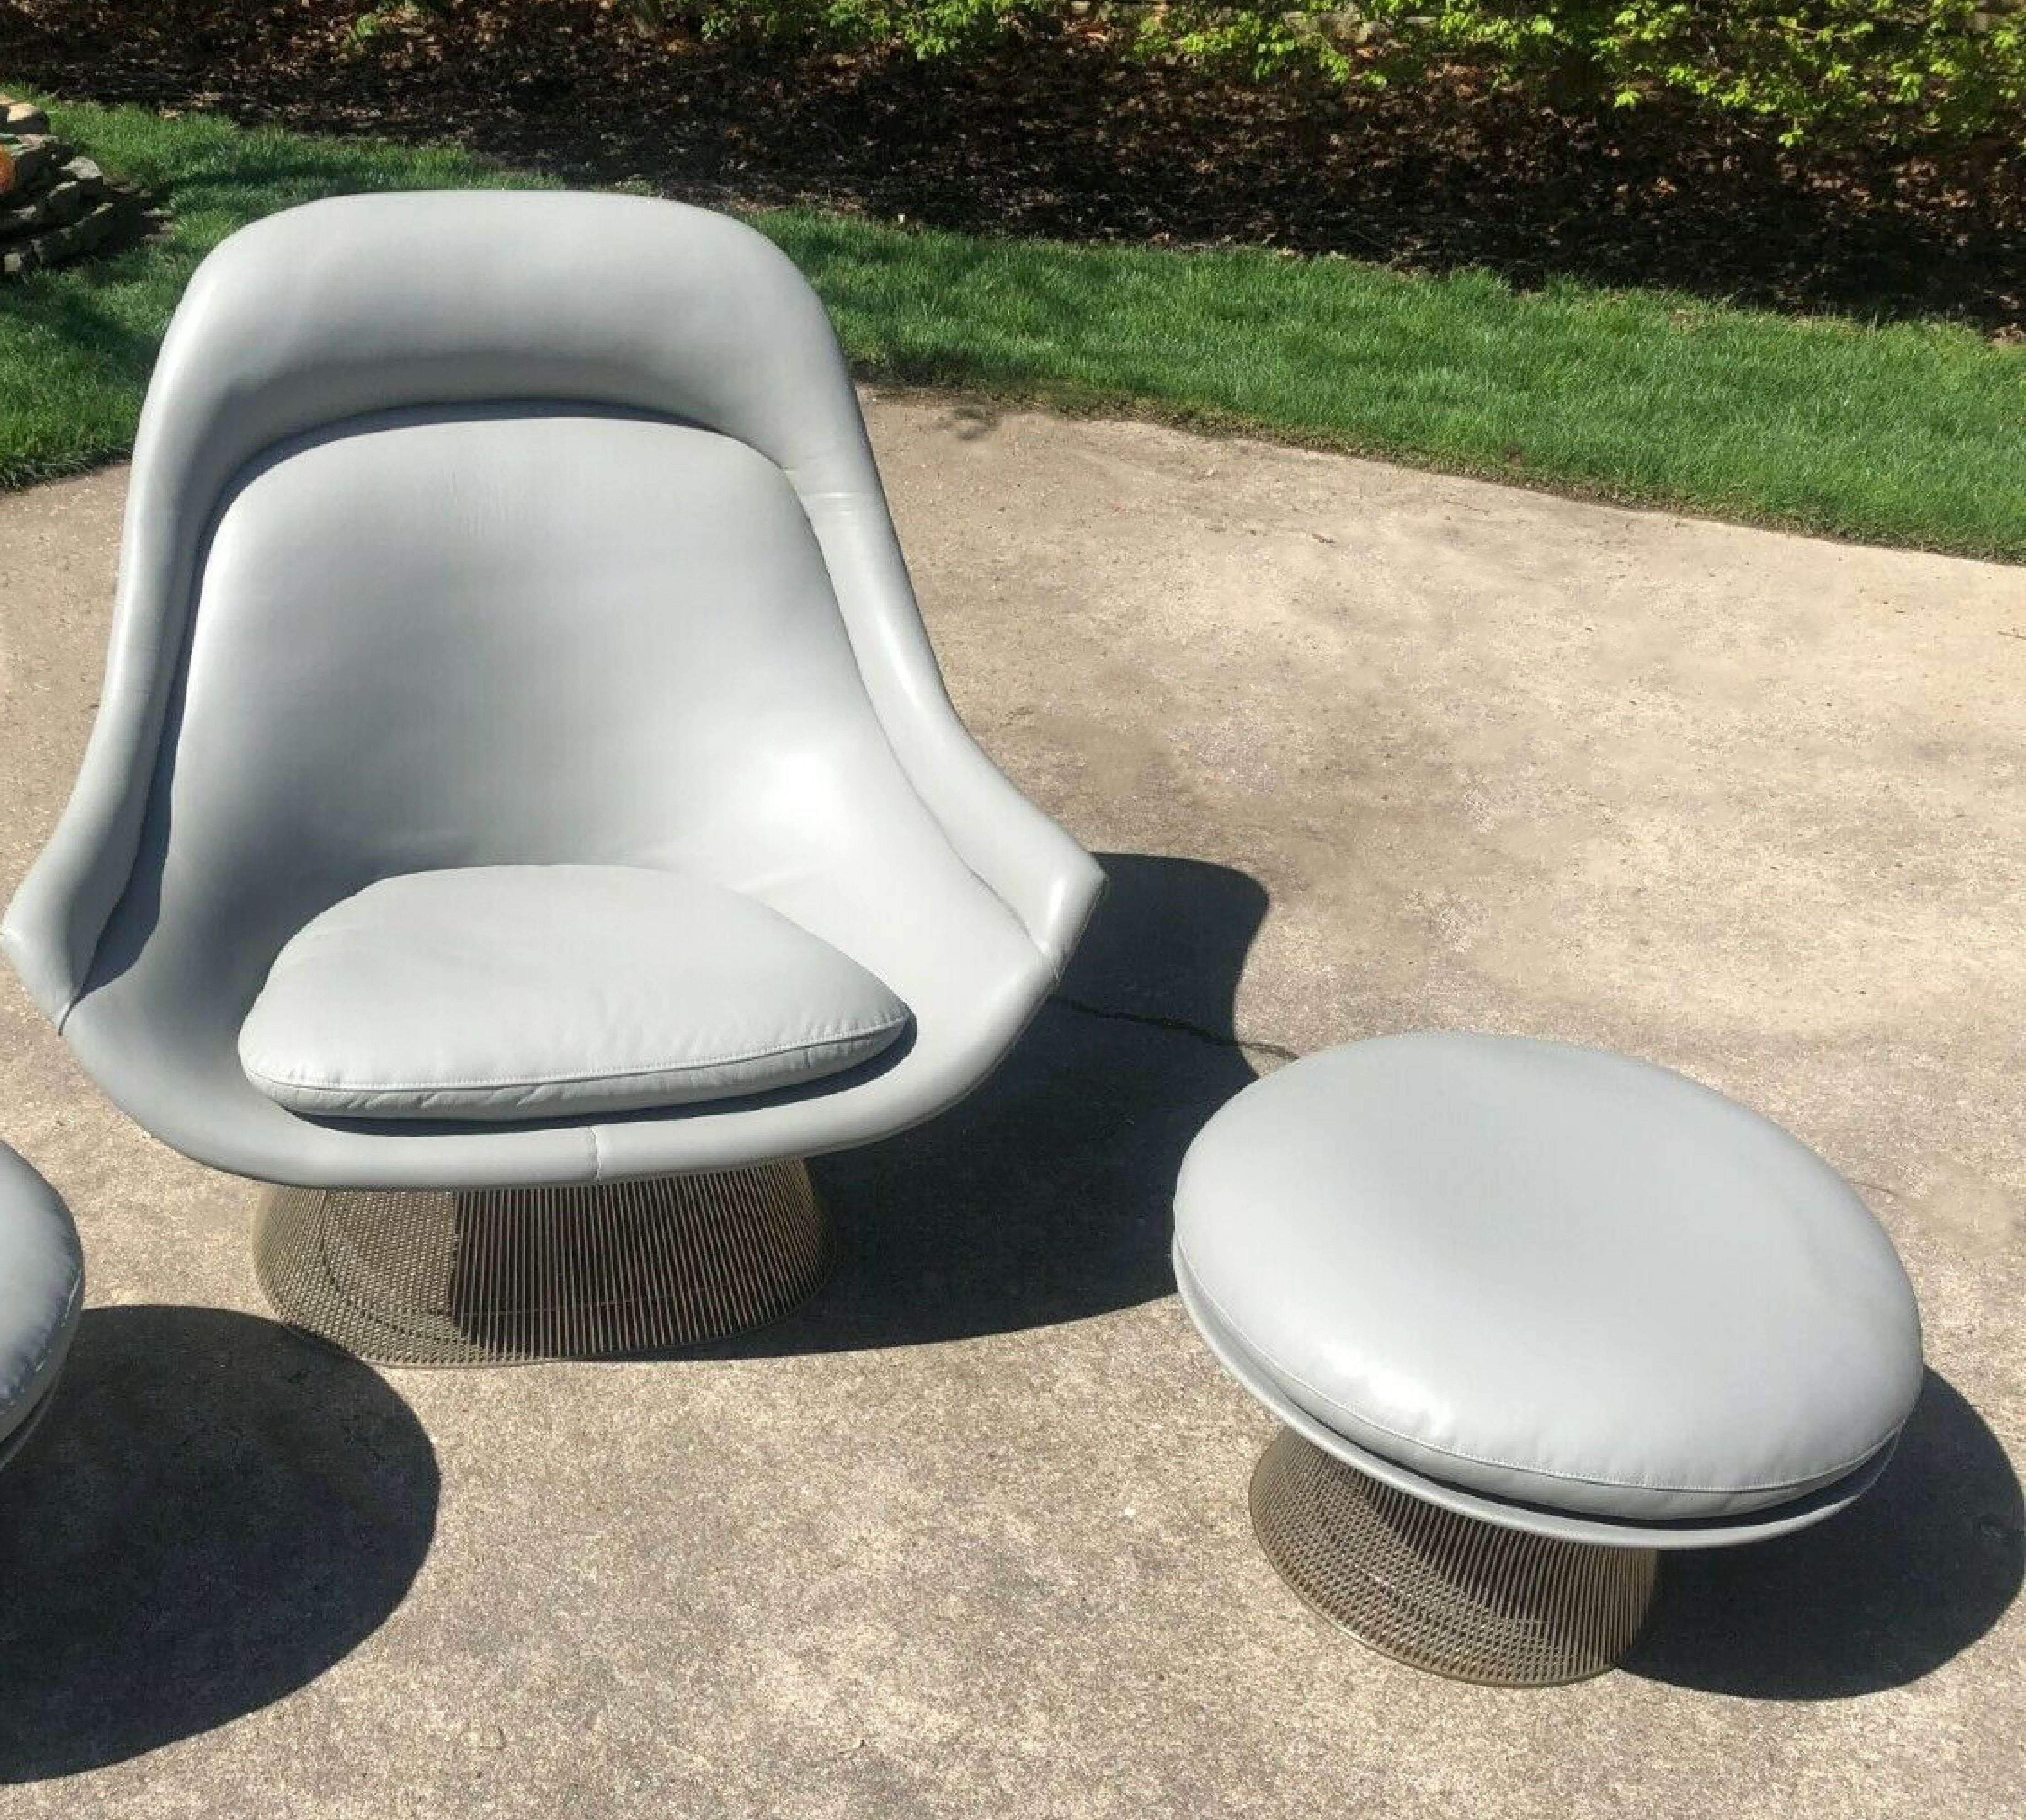 Warren platner grey leather easy chair and ottoman set of three, Knoll, 1966. Knoll Models 1705L and 1705Y. Please see last image for proper dimensions. 
Warren Platner for Knoll grey leather model 1705 wire easy lounge chair, 1966. Stunning set of